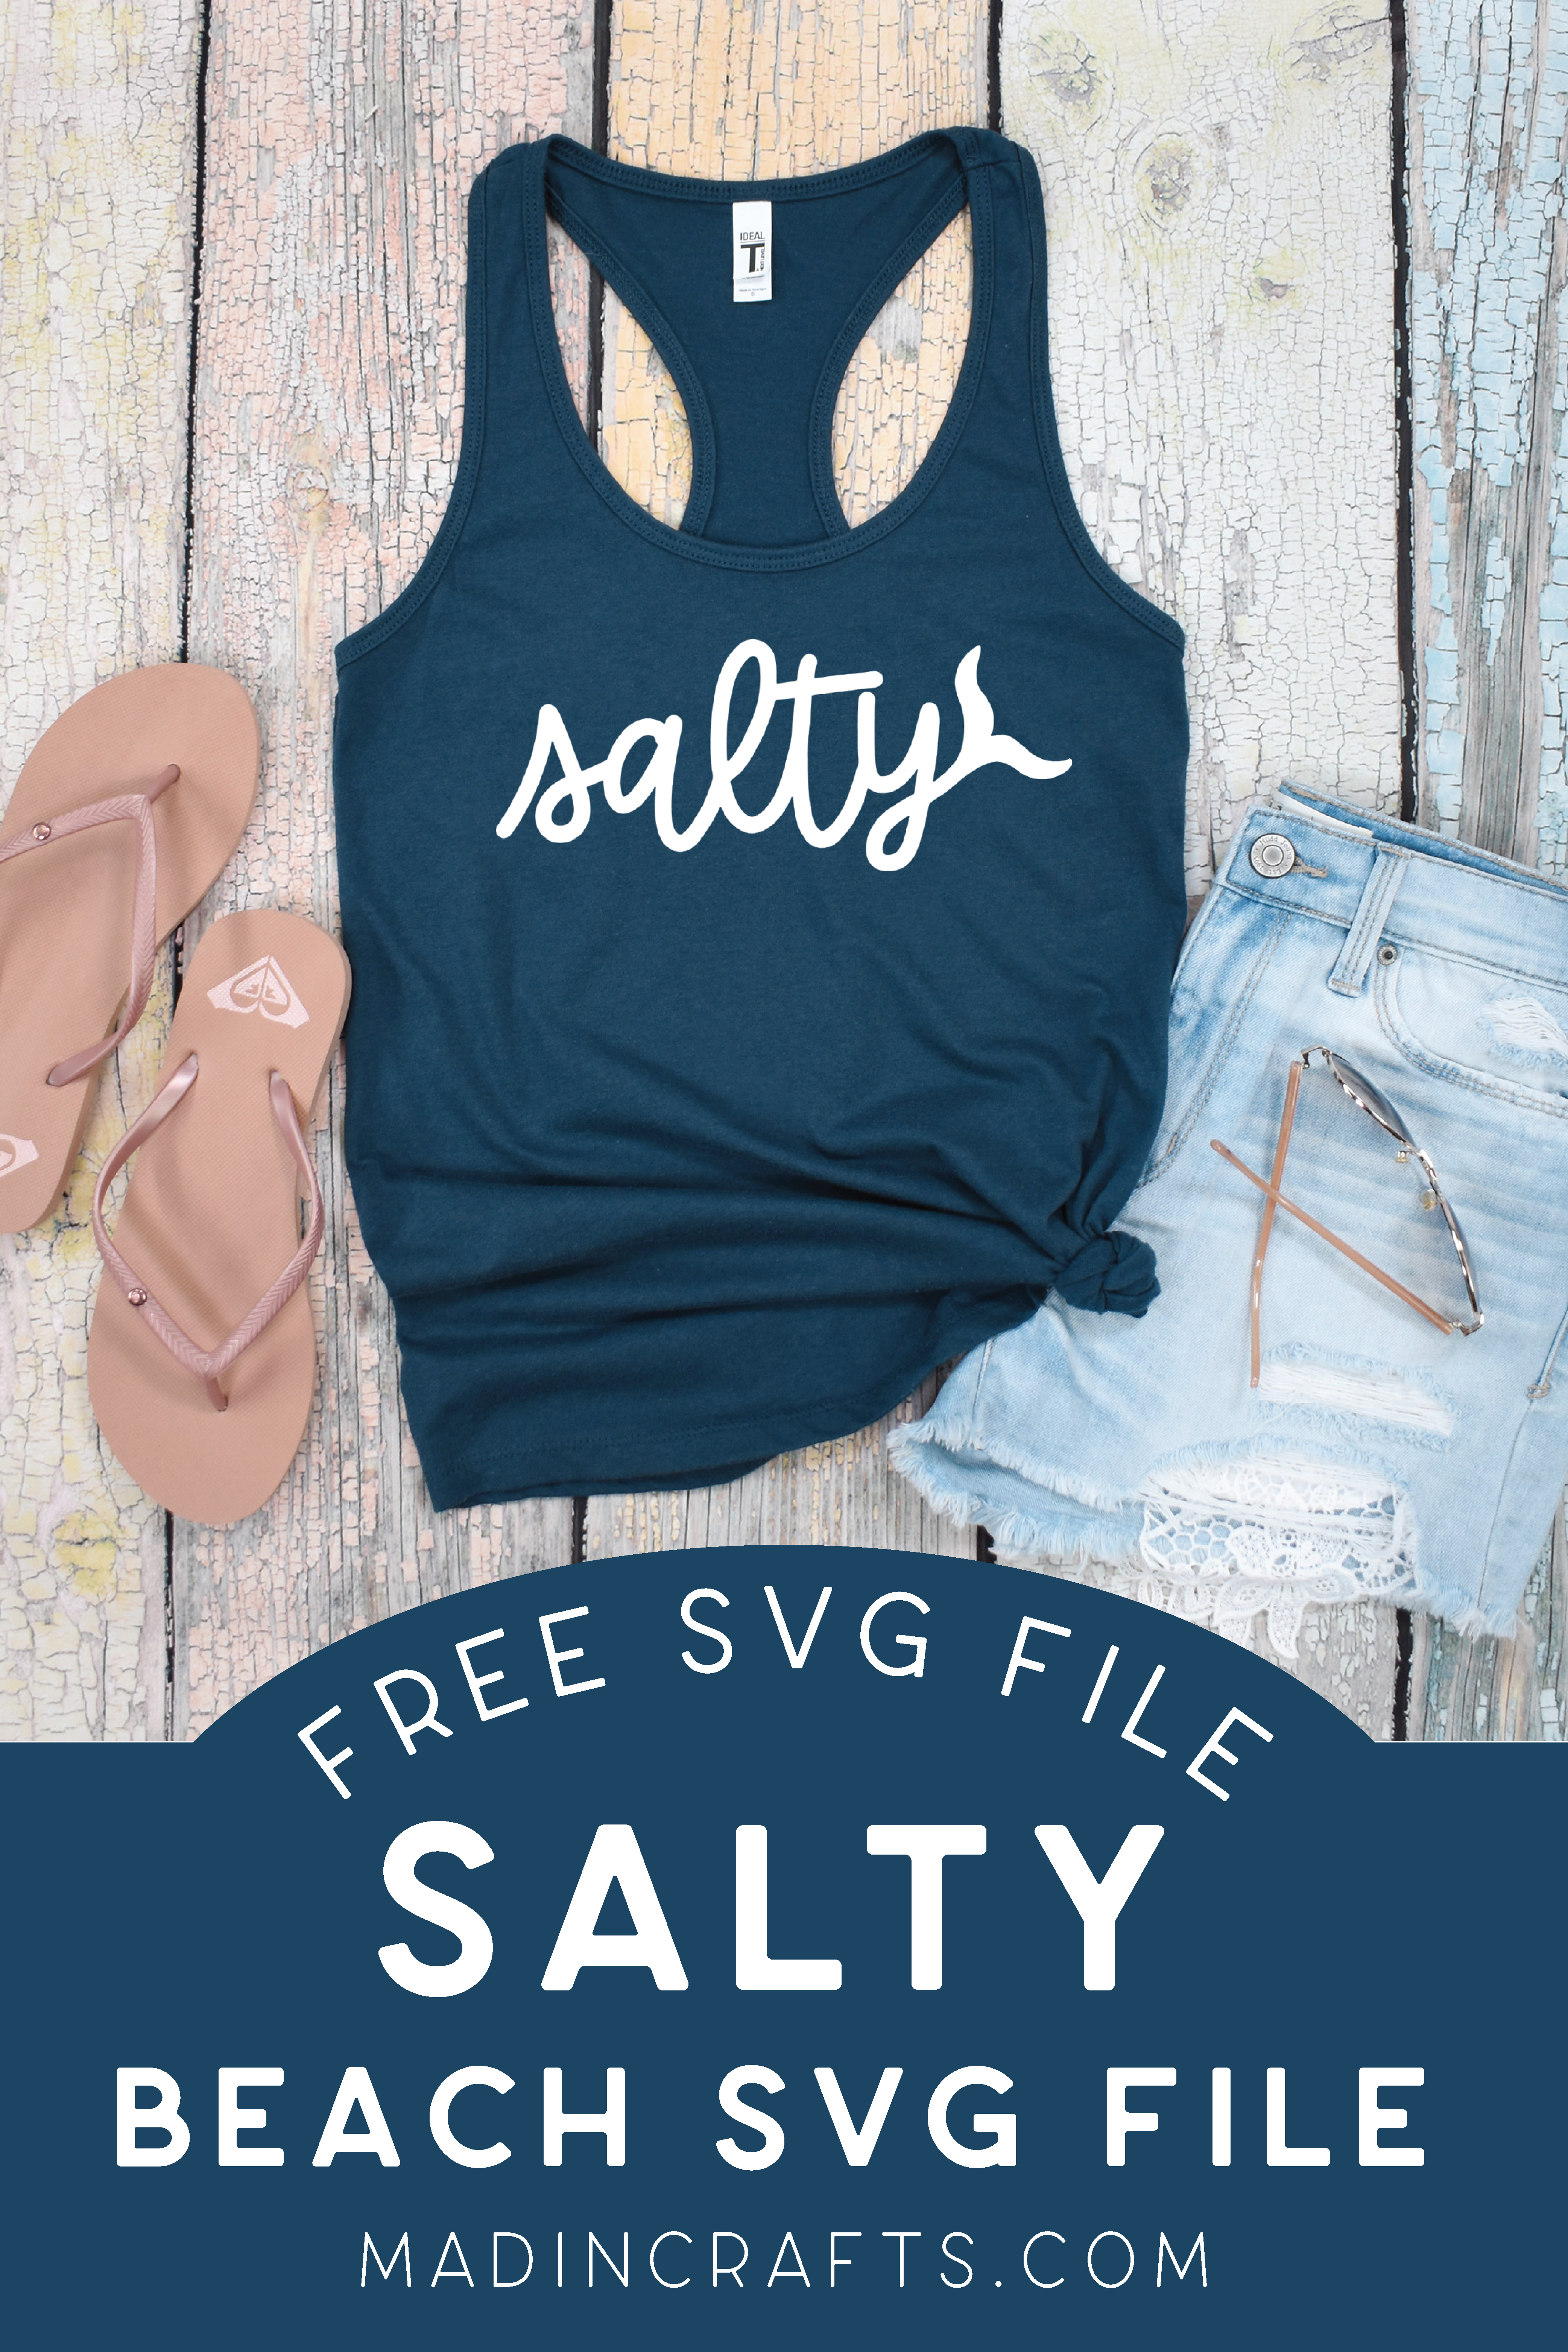 Free Salty SVG on a blue tank top